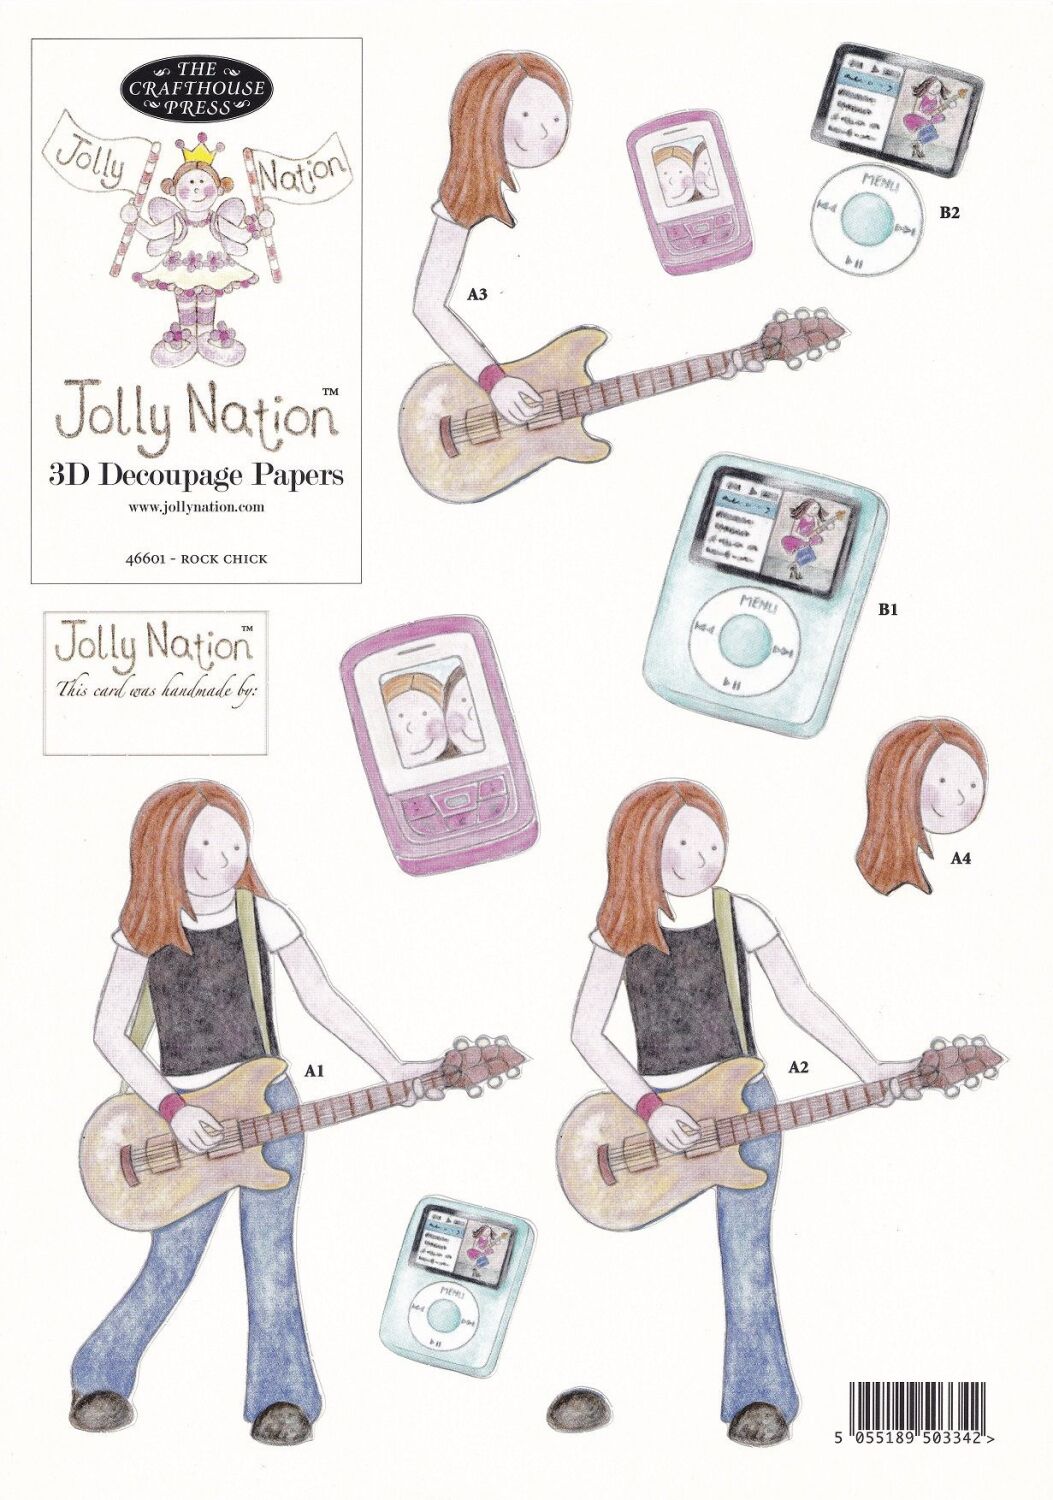 Jolly Nation 3D decoupage with FREE packing paper